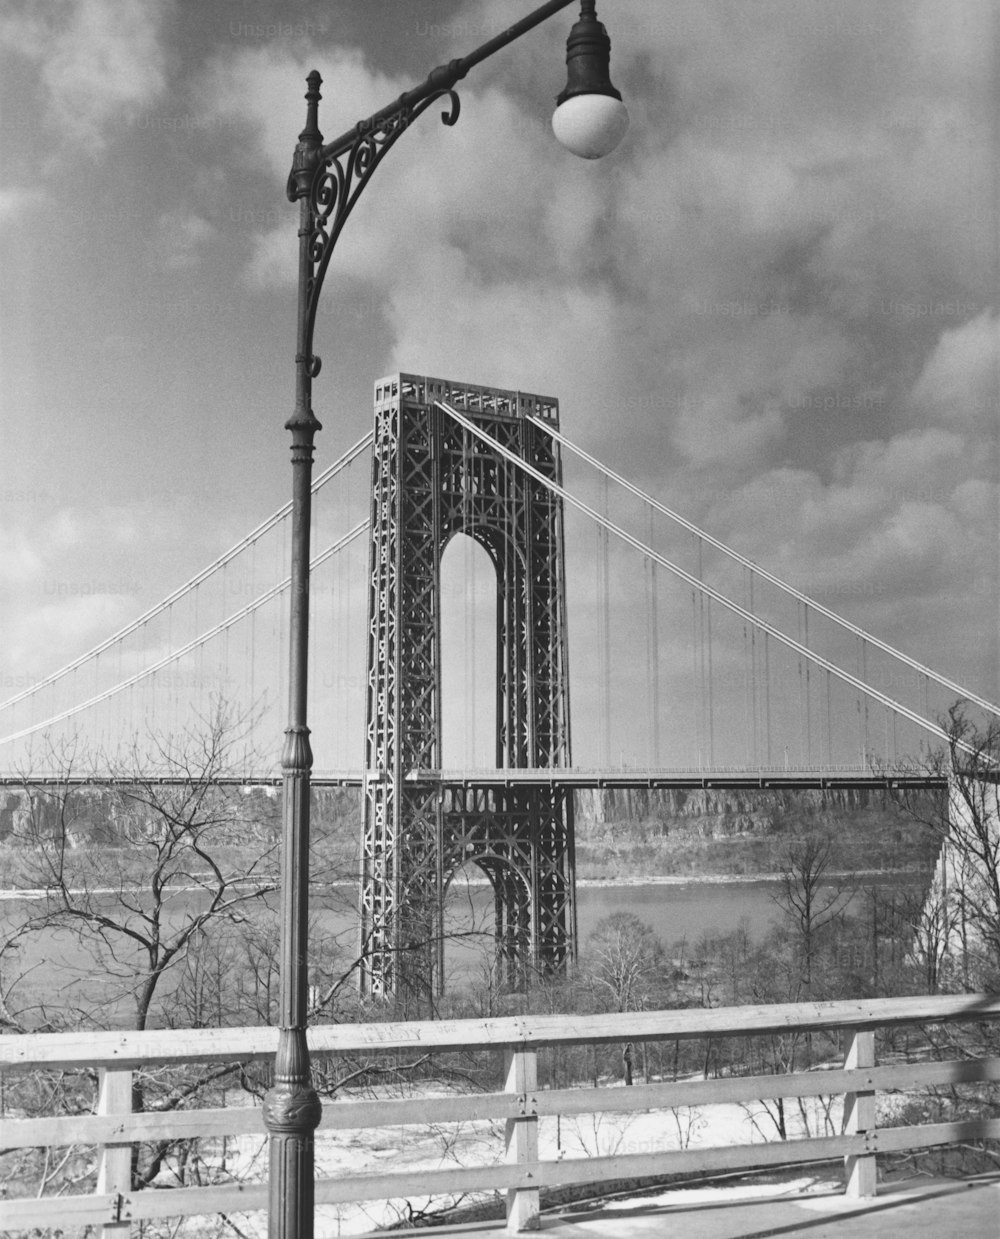 a black and white photo of a street light and a bridge